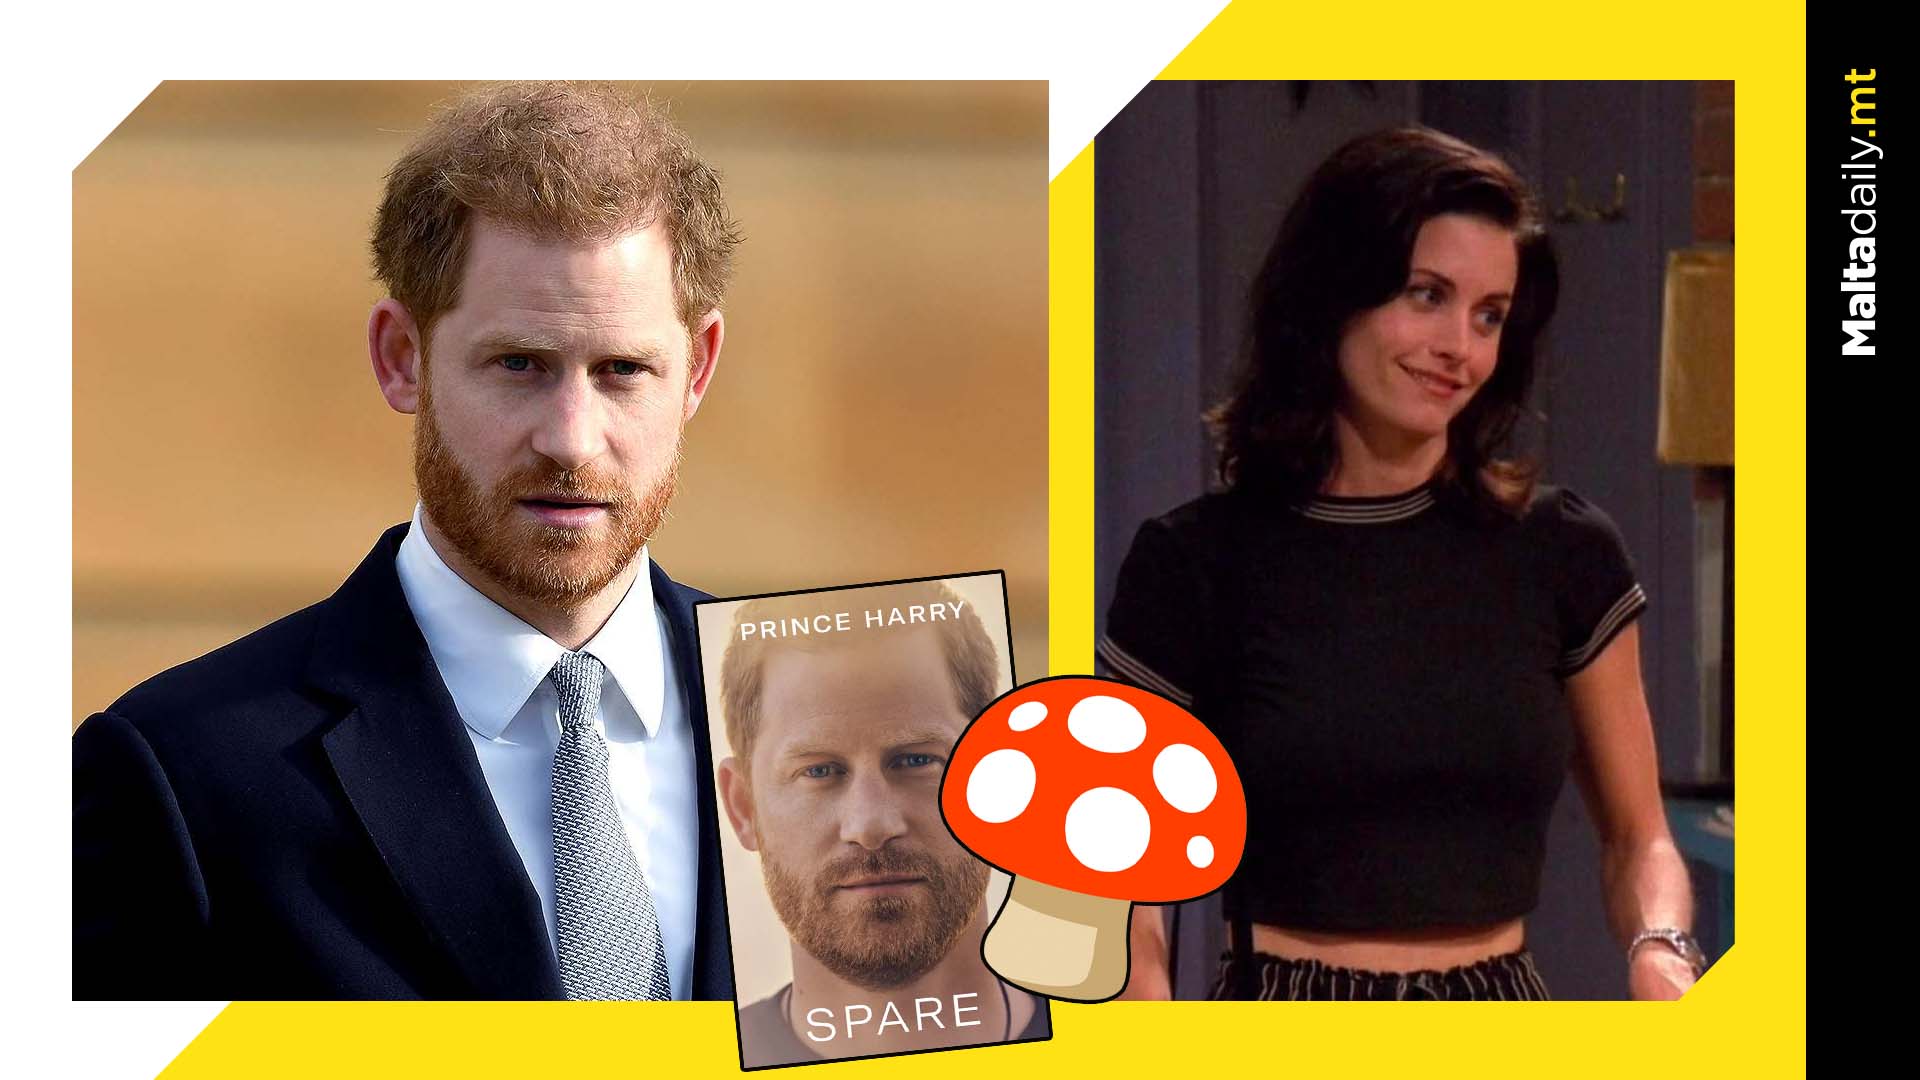 Prince Harry tripped on mushrooms in Courteney Cox’s house